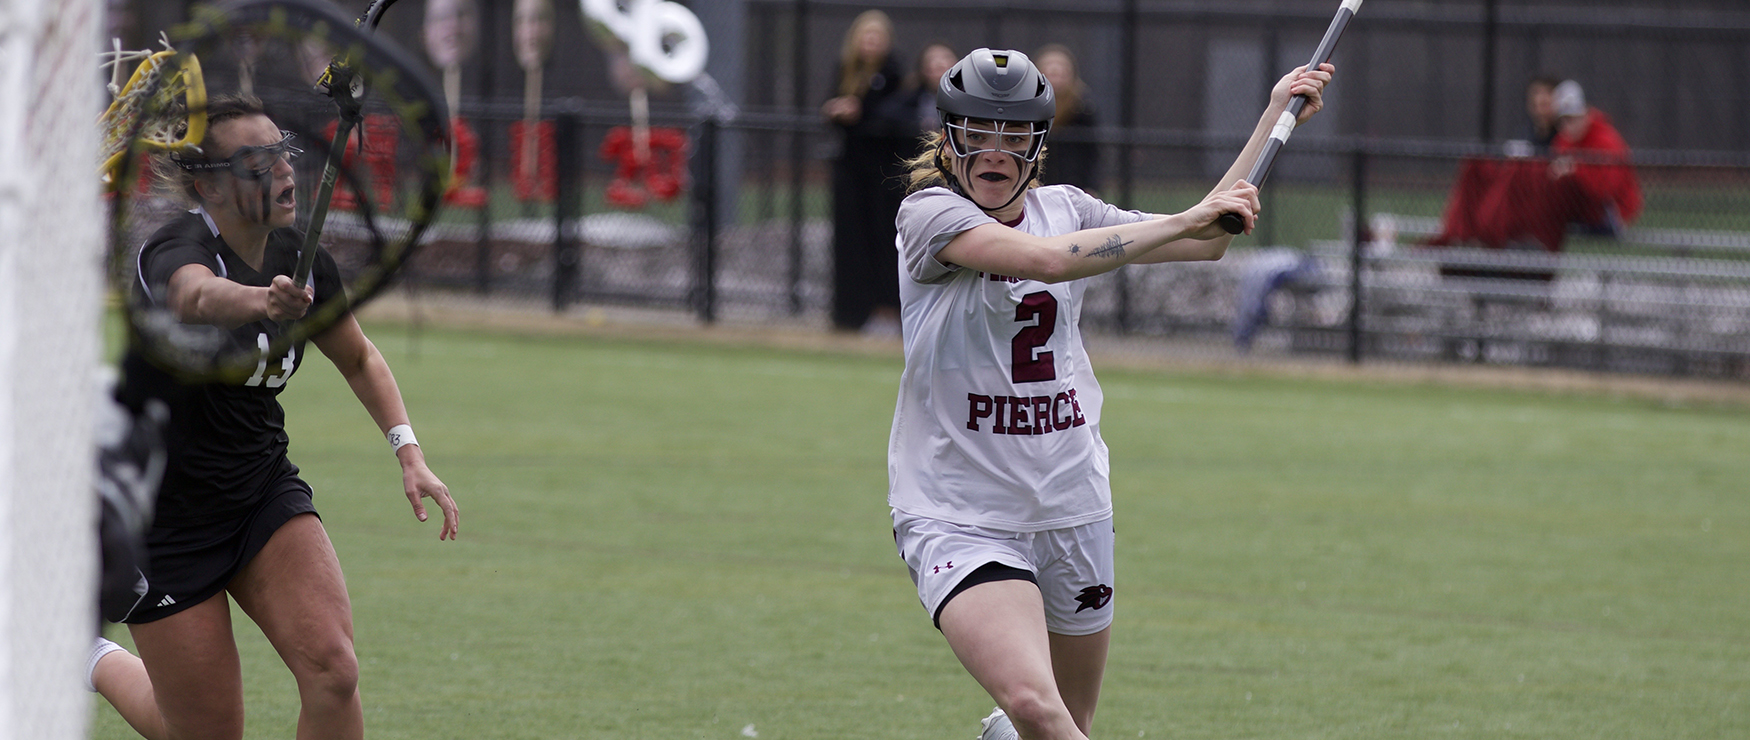 Women’s Lacrosse Falls Behind Early in 21-14 Loss to No. 15 Merrimack